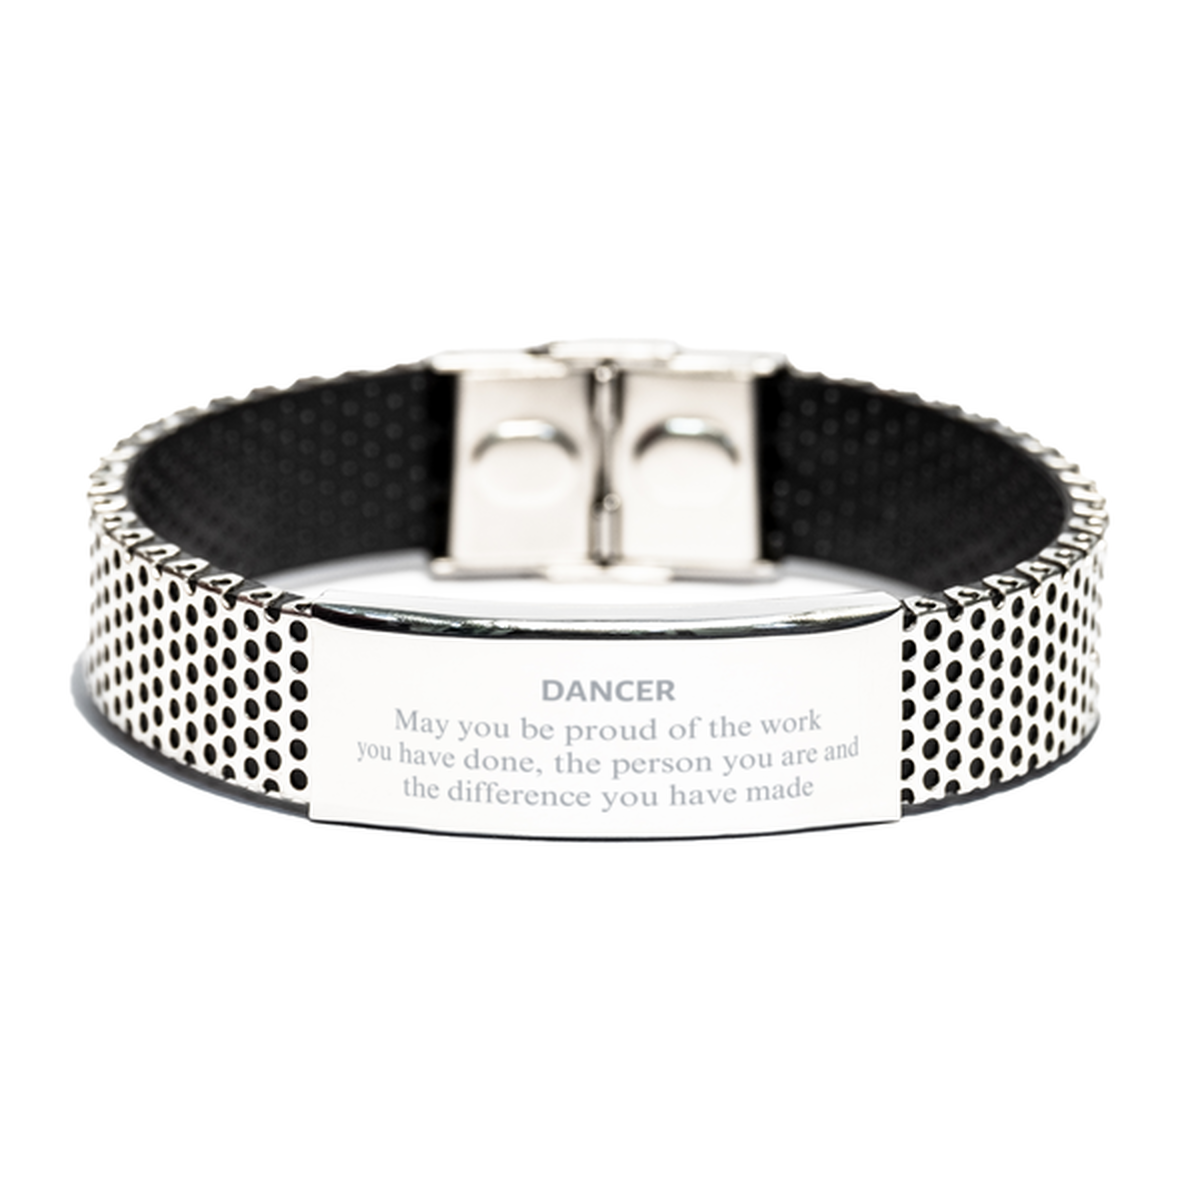 Dancer May you be proud of the work you have done, Retirement Dancer Stainless Steel Bracelet for Colleague Appreciation Gifts Amazing for Dancer